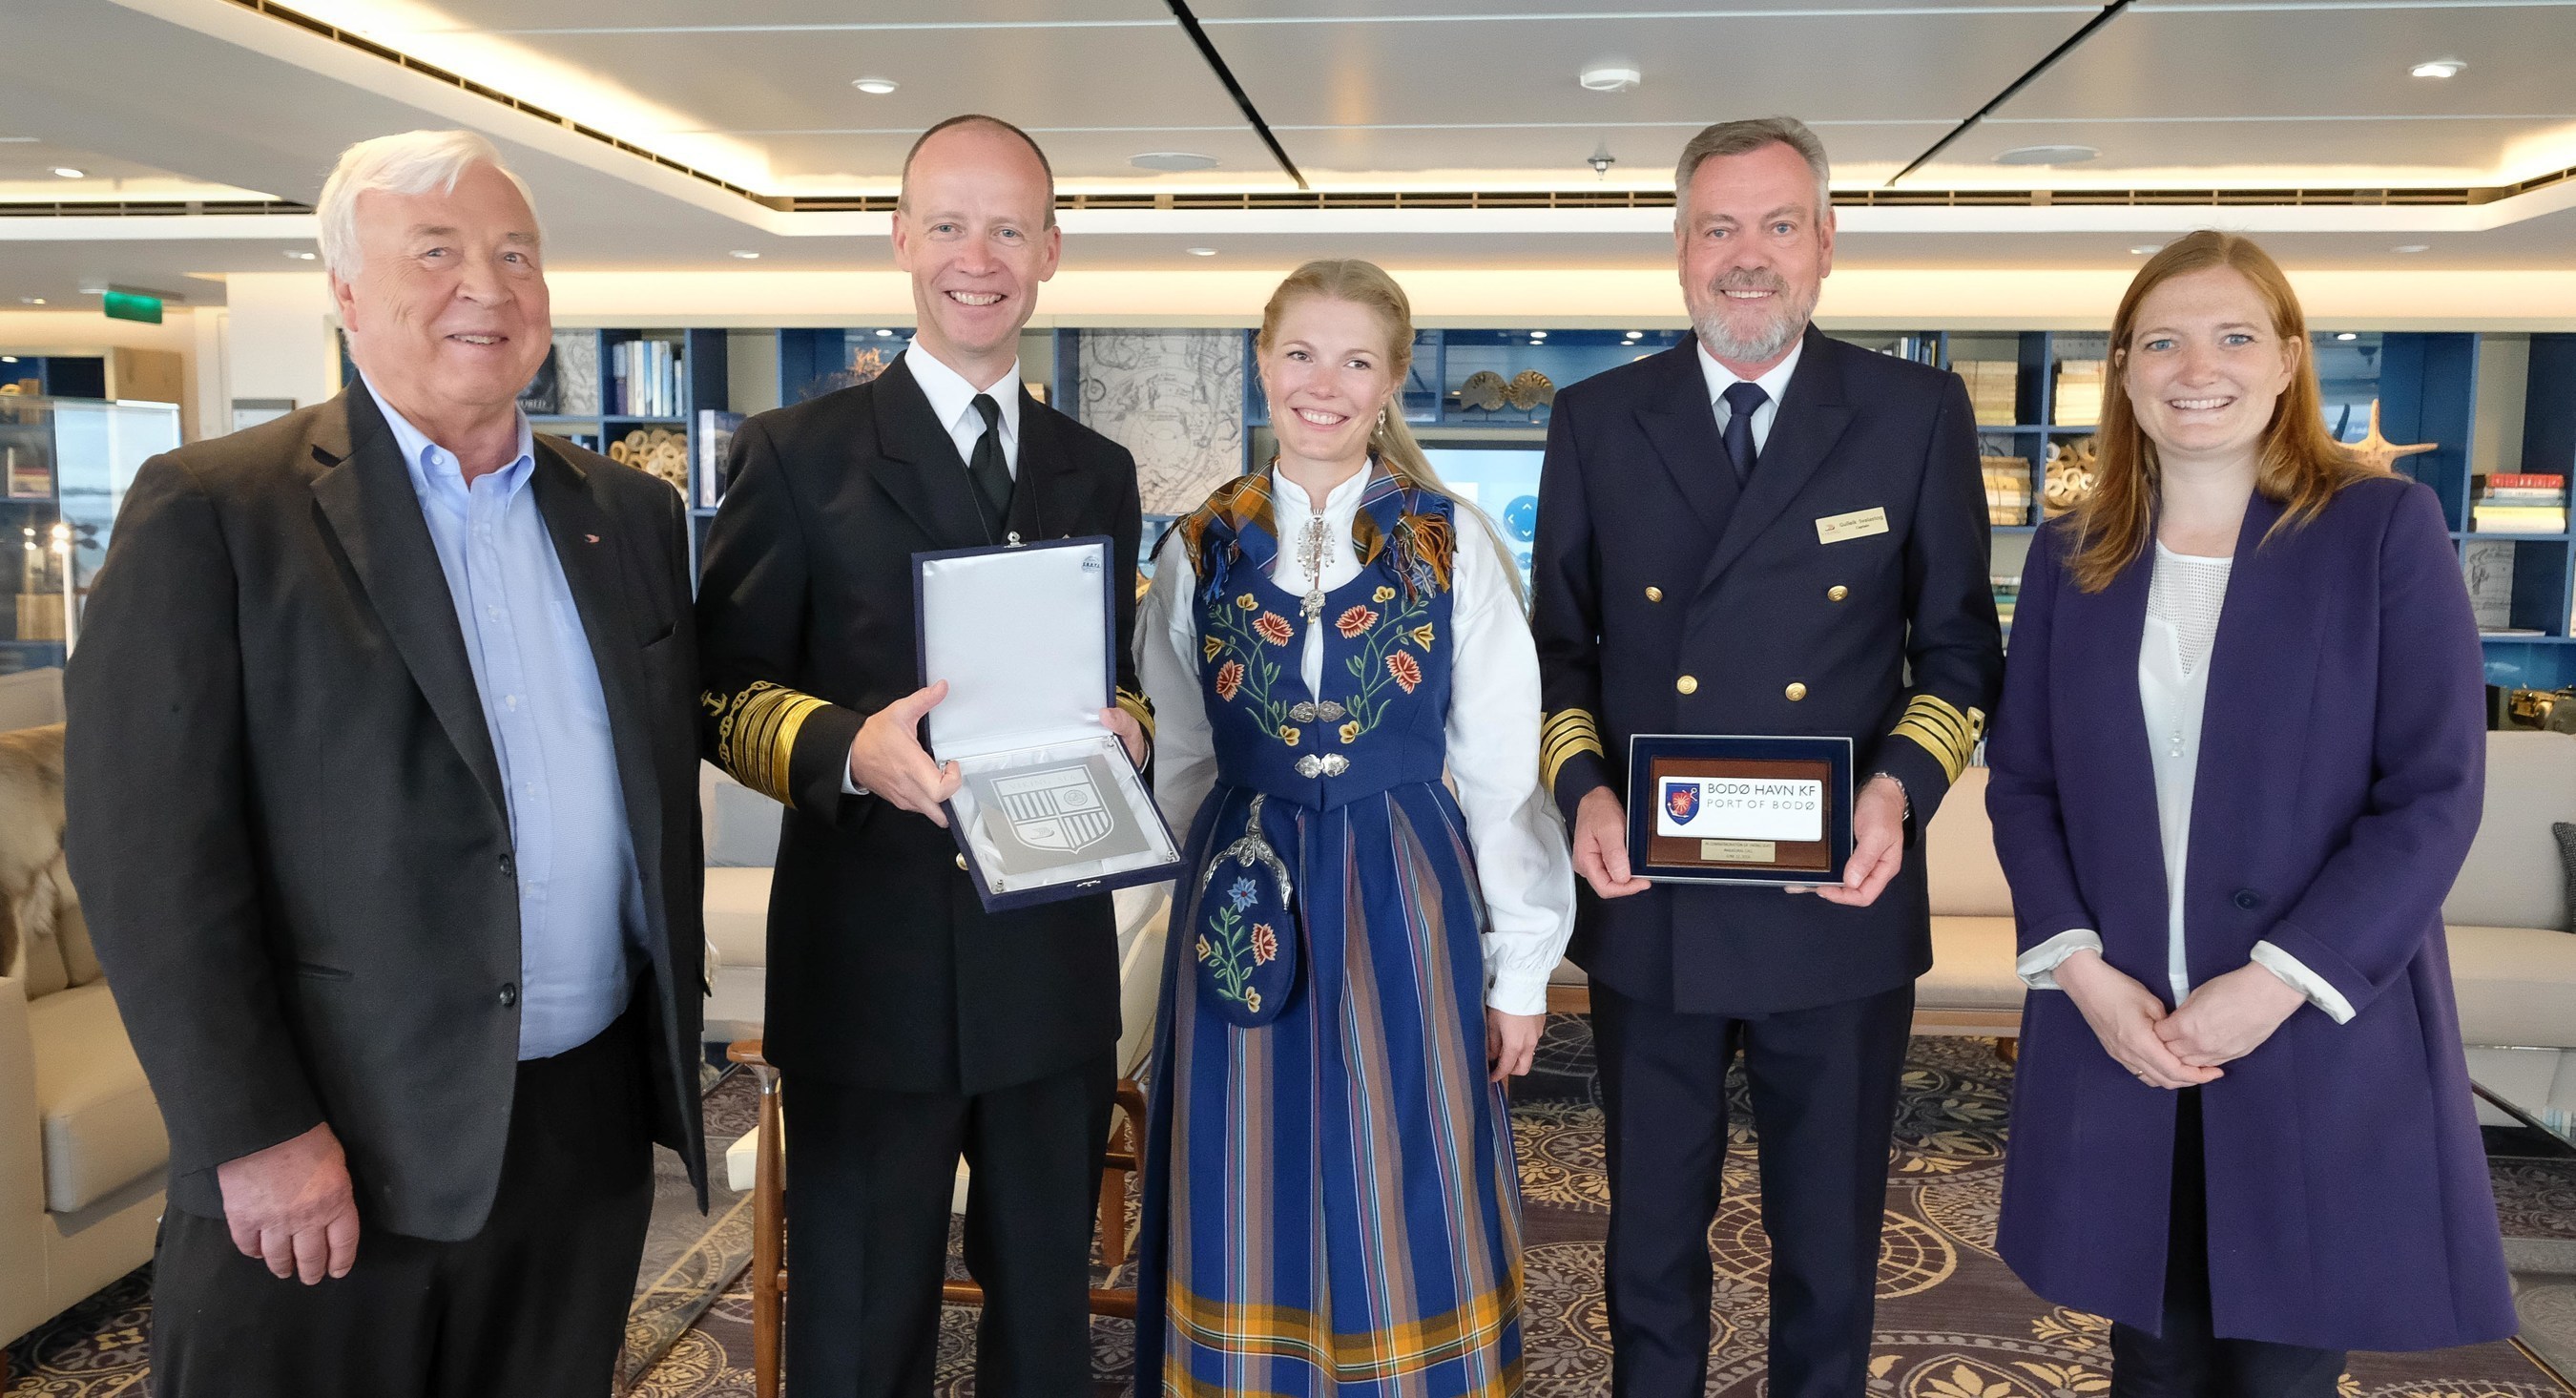 Viking Cruises founder and chairman, Torstein Hagen, celebrates arrival of the company's new ship, Viking Sea, in five new Norwegian ports with commemorative plaque ceremonies attended by local officials. Pictured (left to right): Viking Cruises founder and chairman Torstein Hagen, Bodo Port Director Ingvar Mathisen, Visit Bodo's Solveig Caroline Henriksen, Viking Cruises Captain Gulleik Svalastog and Bodo Mayor Ms. Ida Maria Pinnerod.